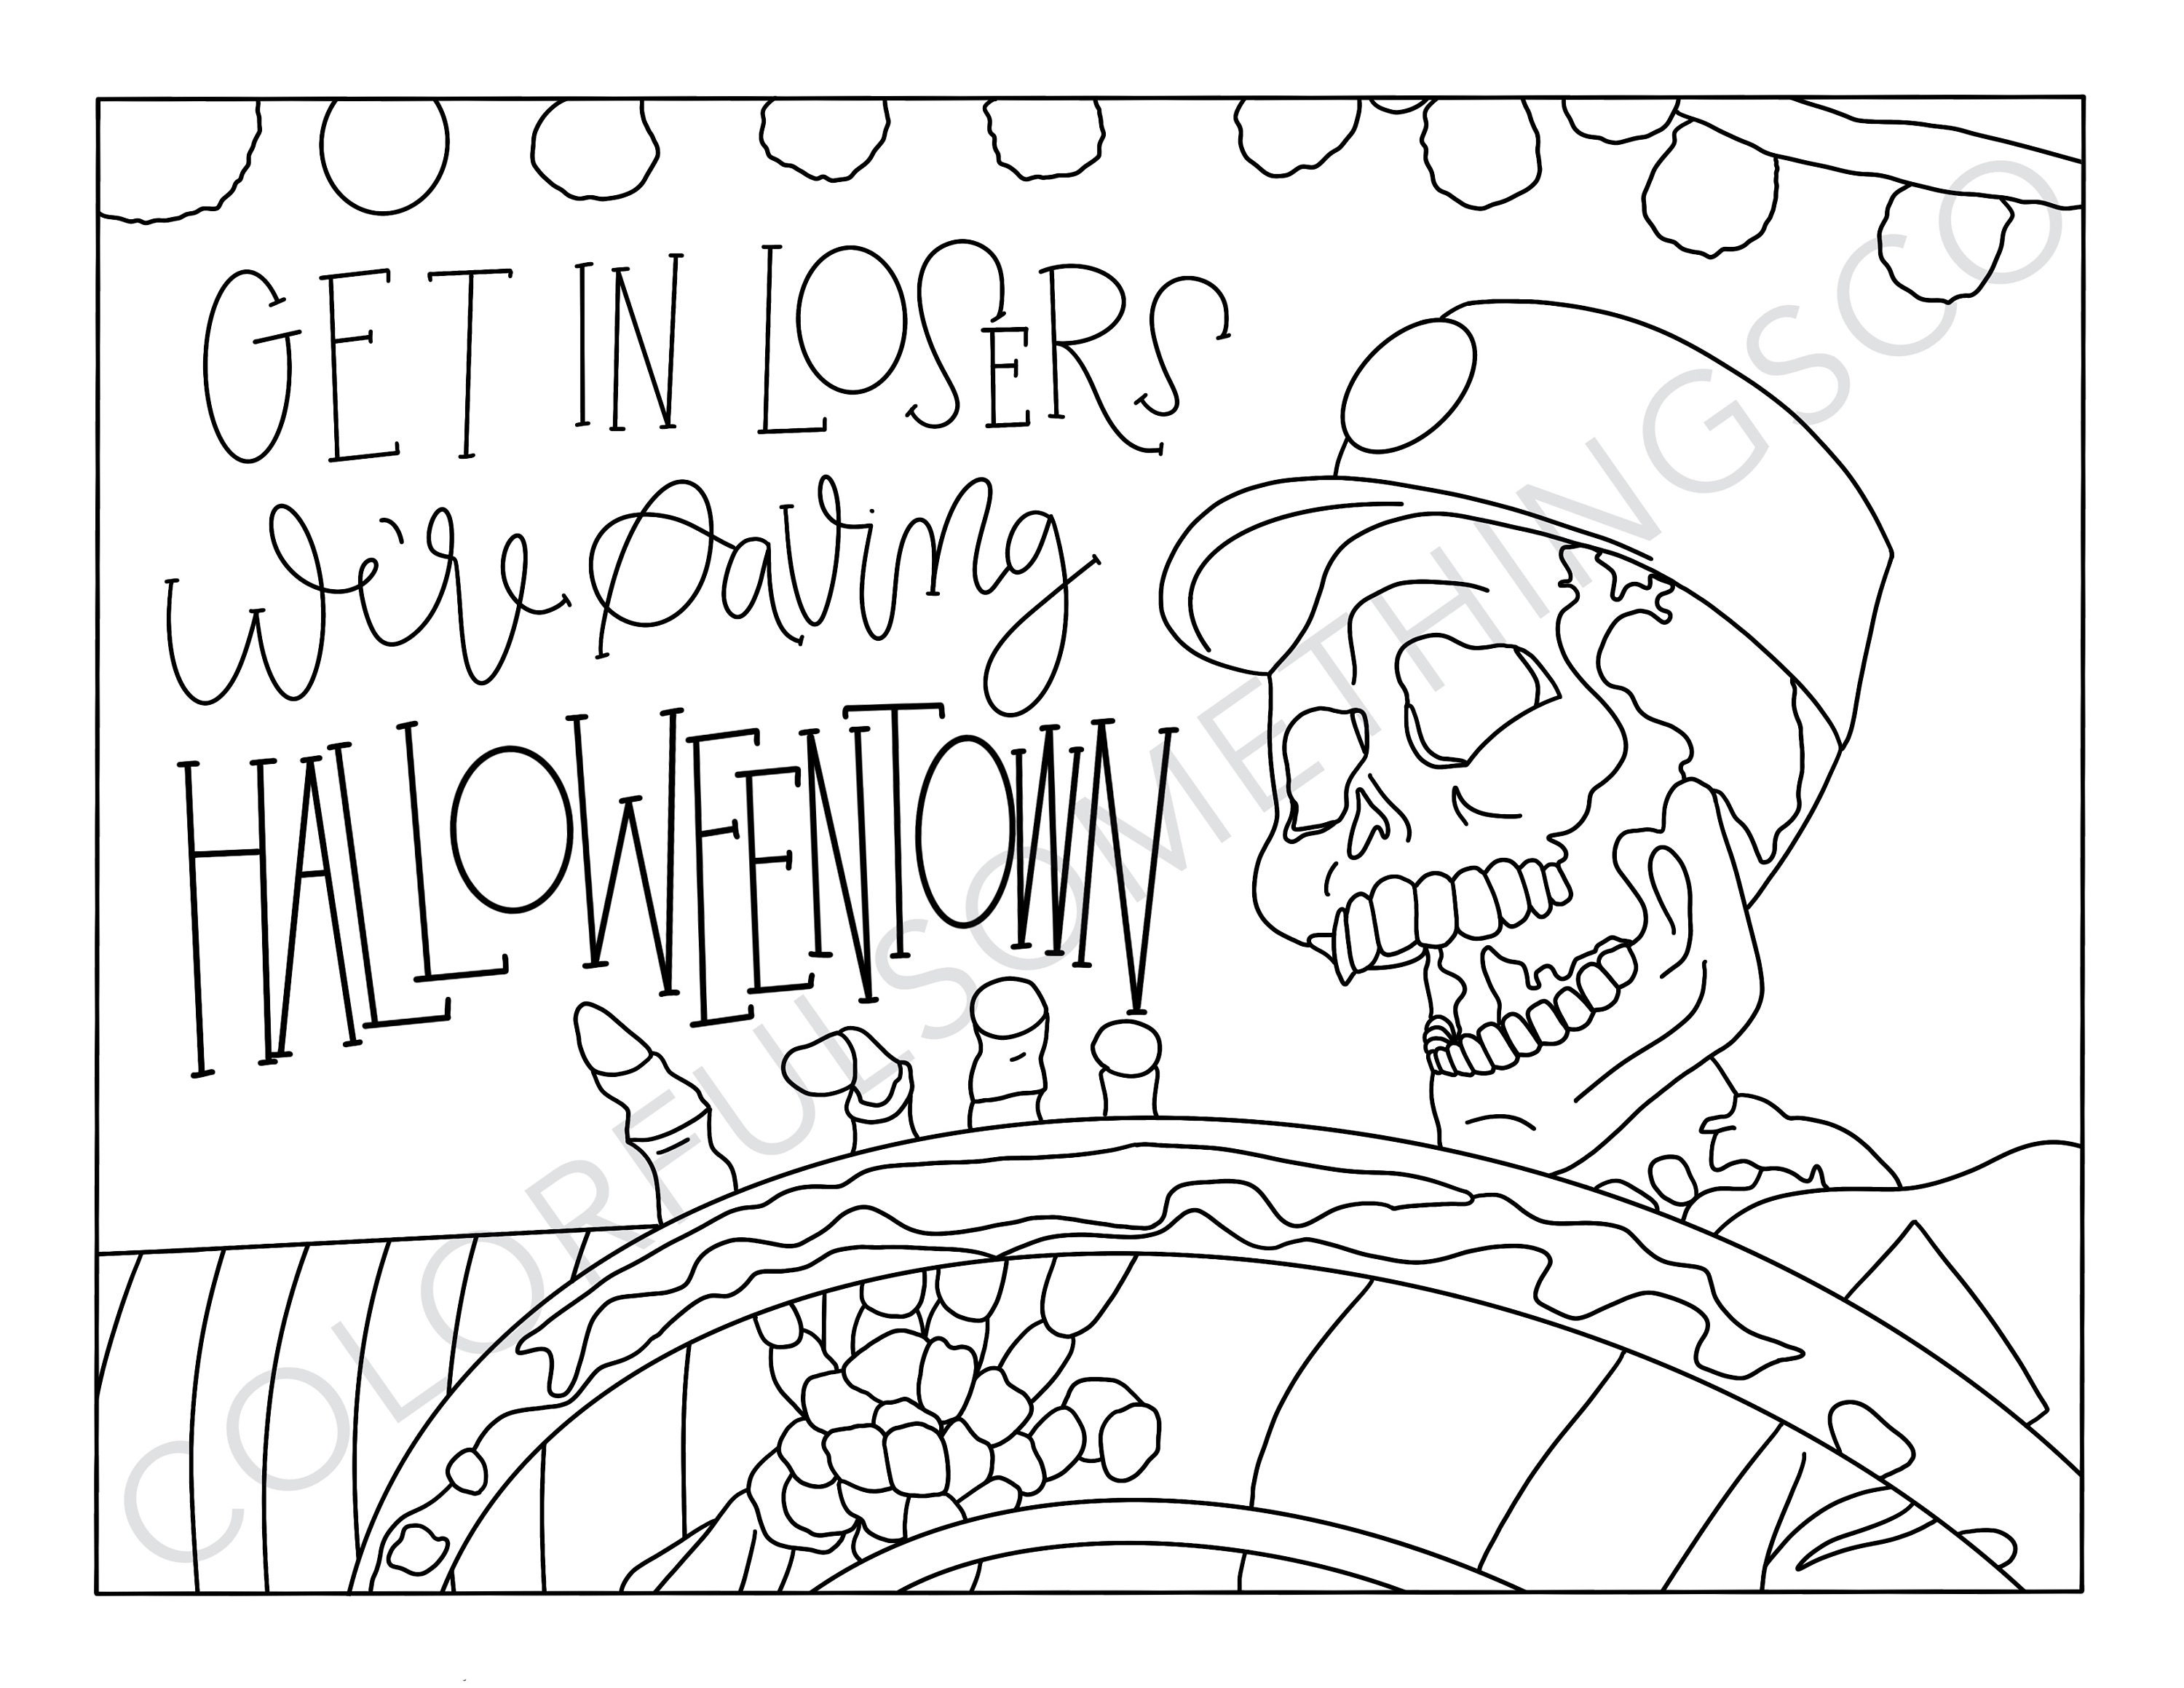 Halloweentown movie coloring pages pack of digital download coloring pages halloween coloring pages